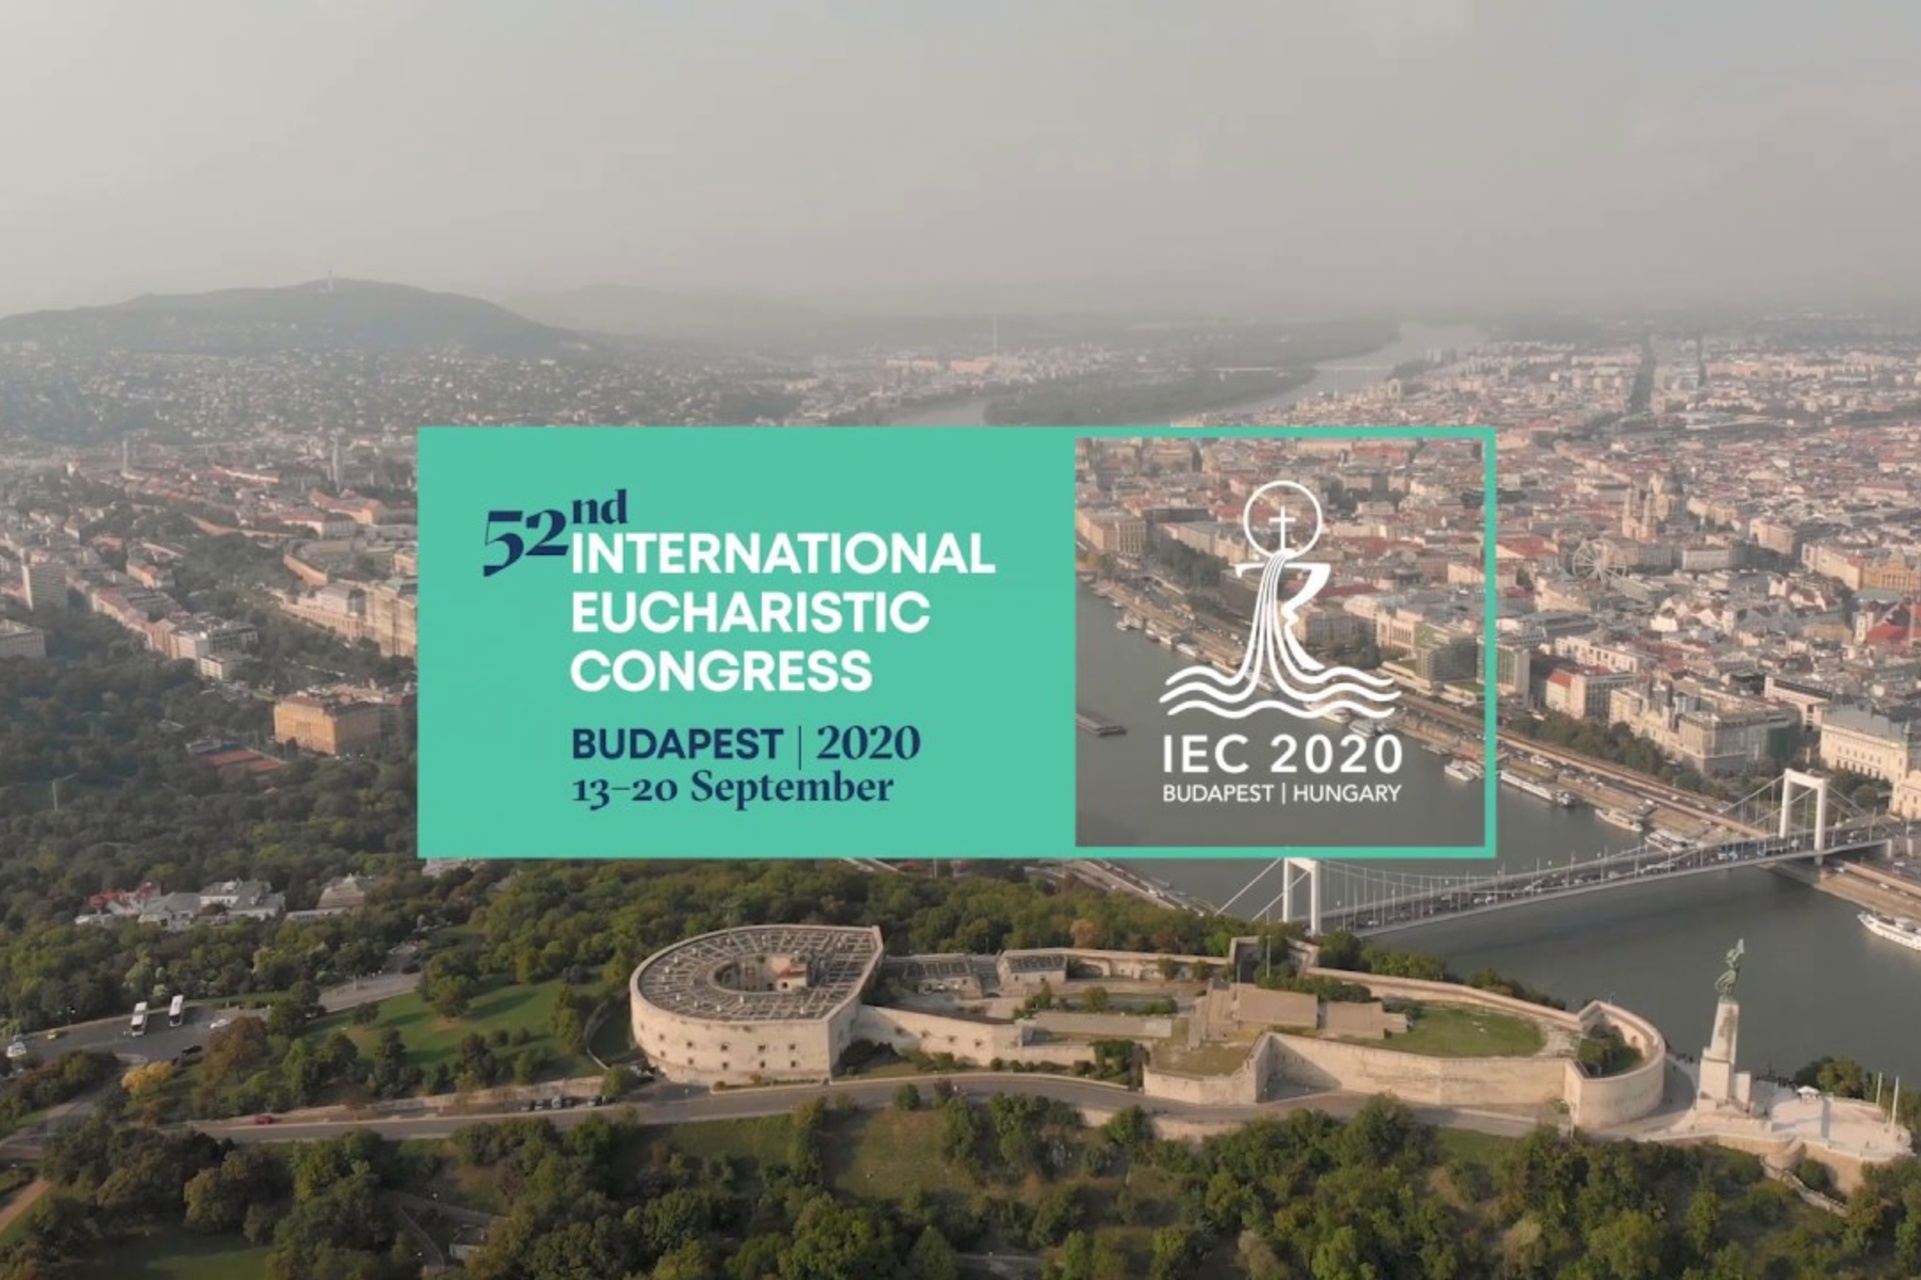 Official Irish Pilgrimage to IEC2020 in Budapest